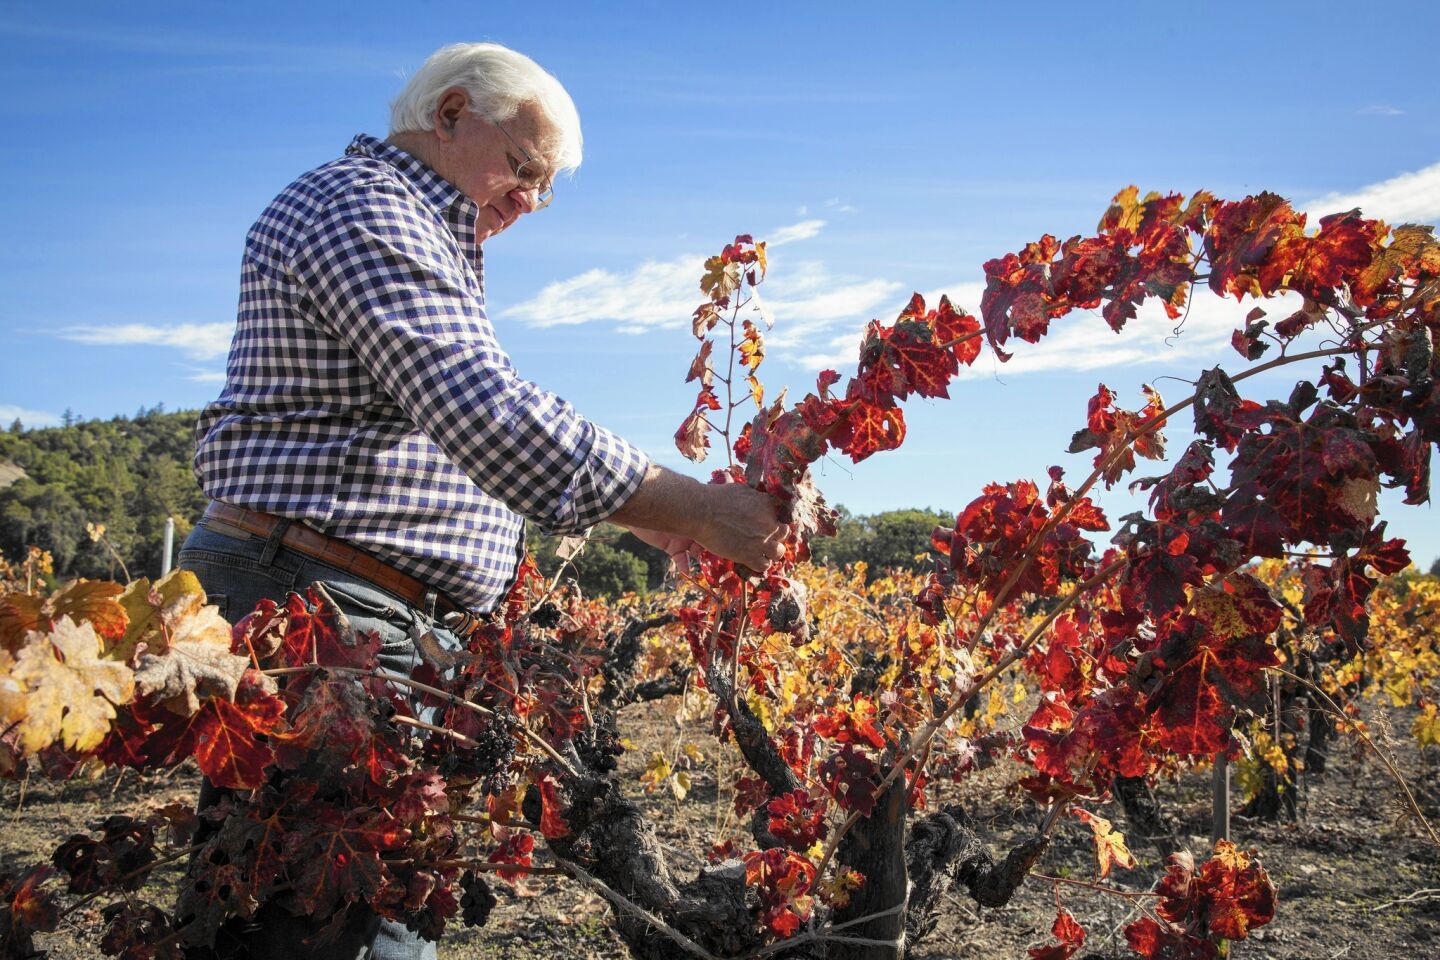 Rich Czapleski, owner of Canard Winery, dry farms all his grapes, including cabernet sauvignon and merlot. “And as a result, I think we get better quality,” he said.